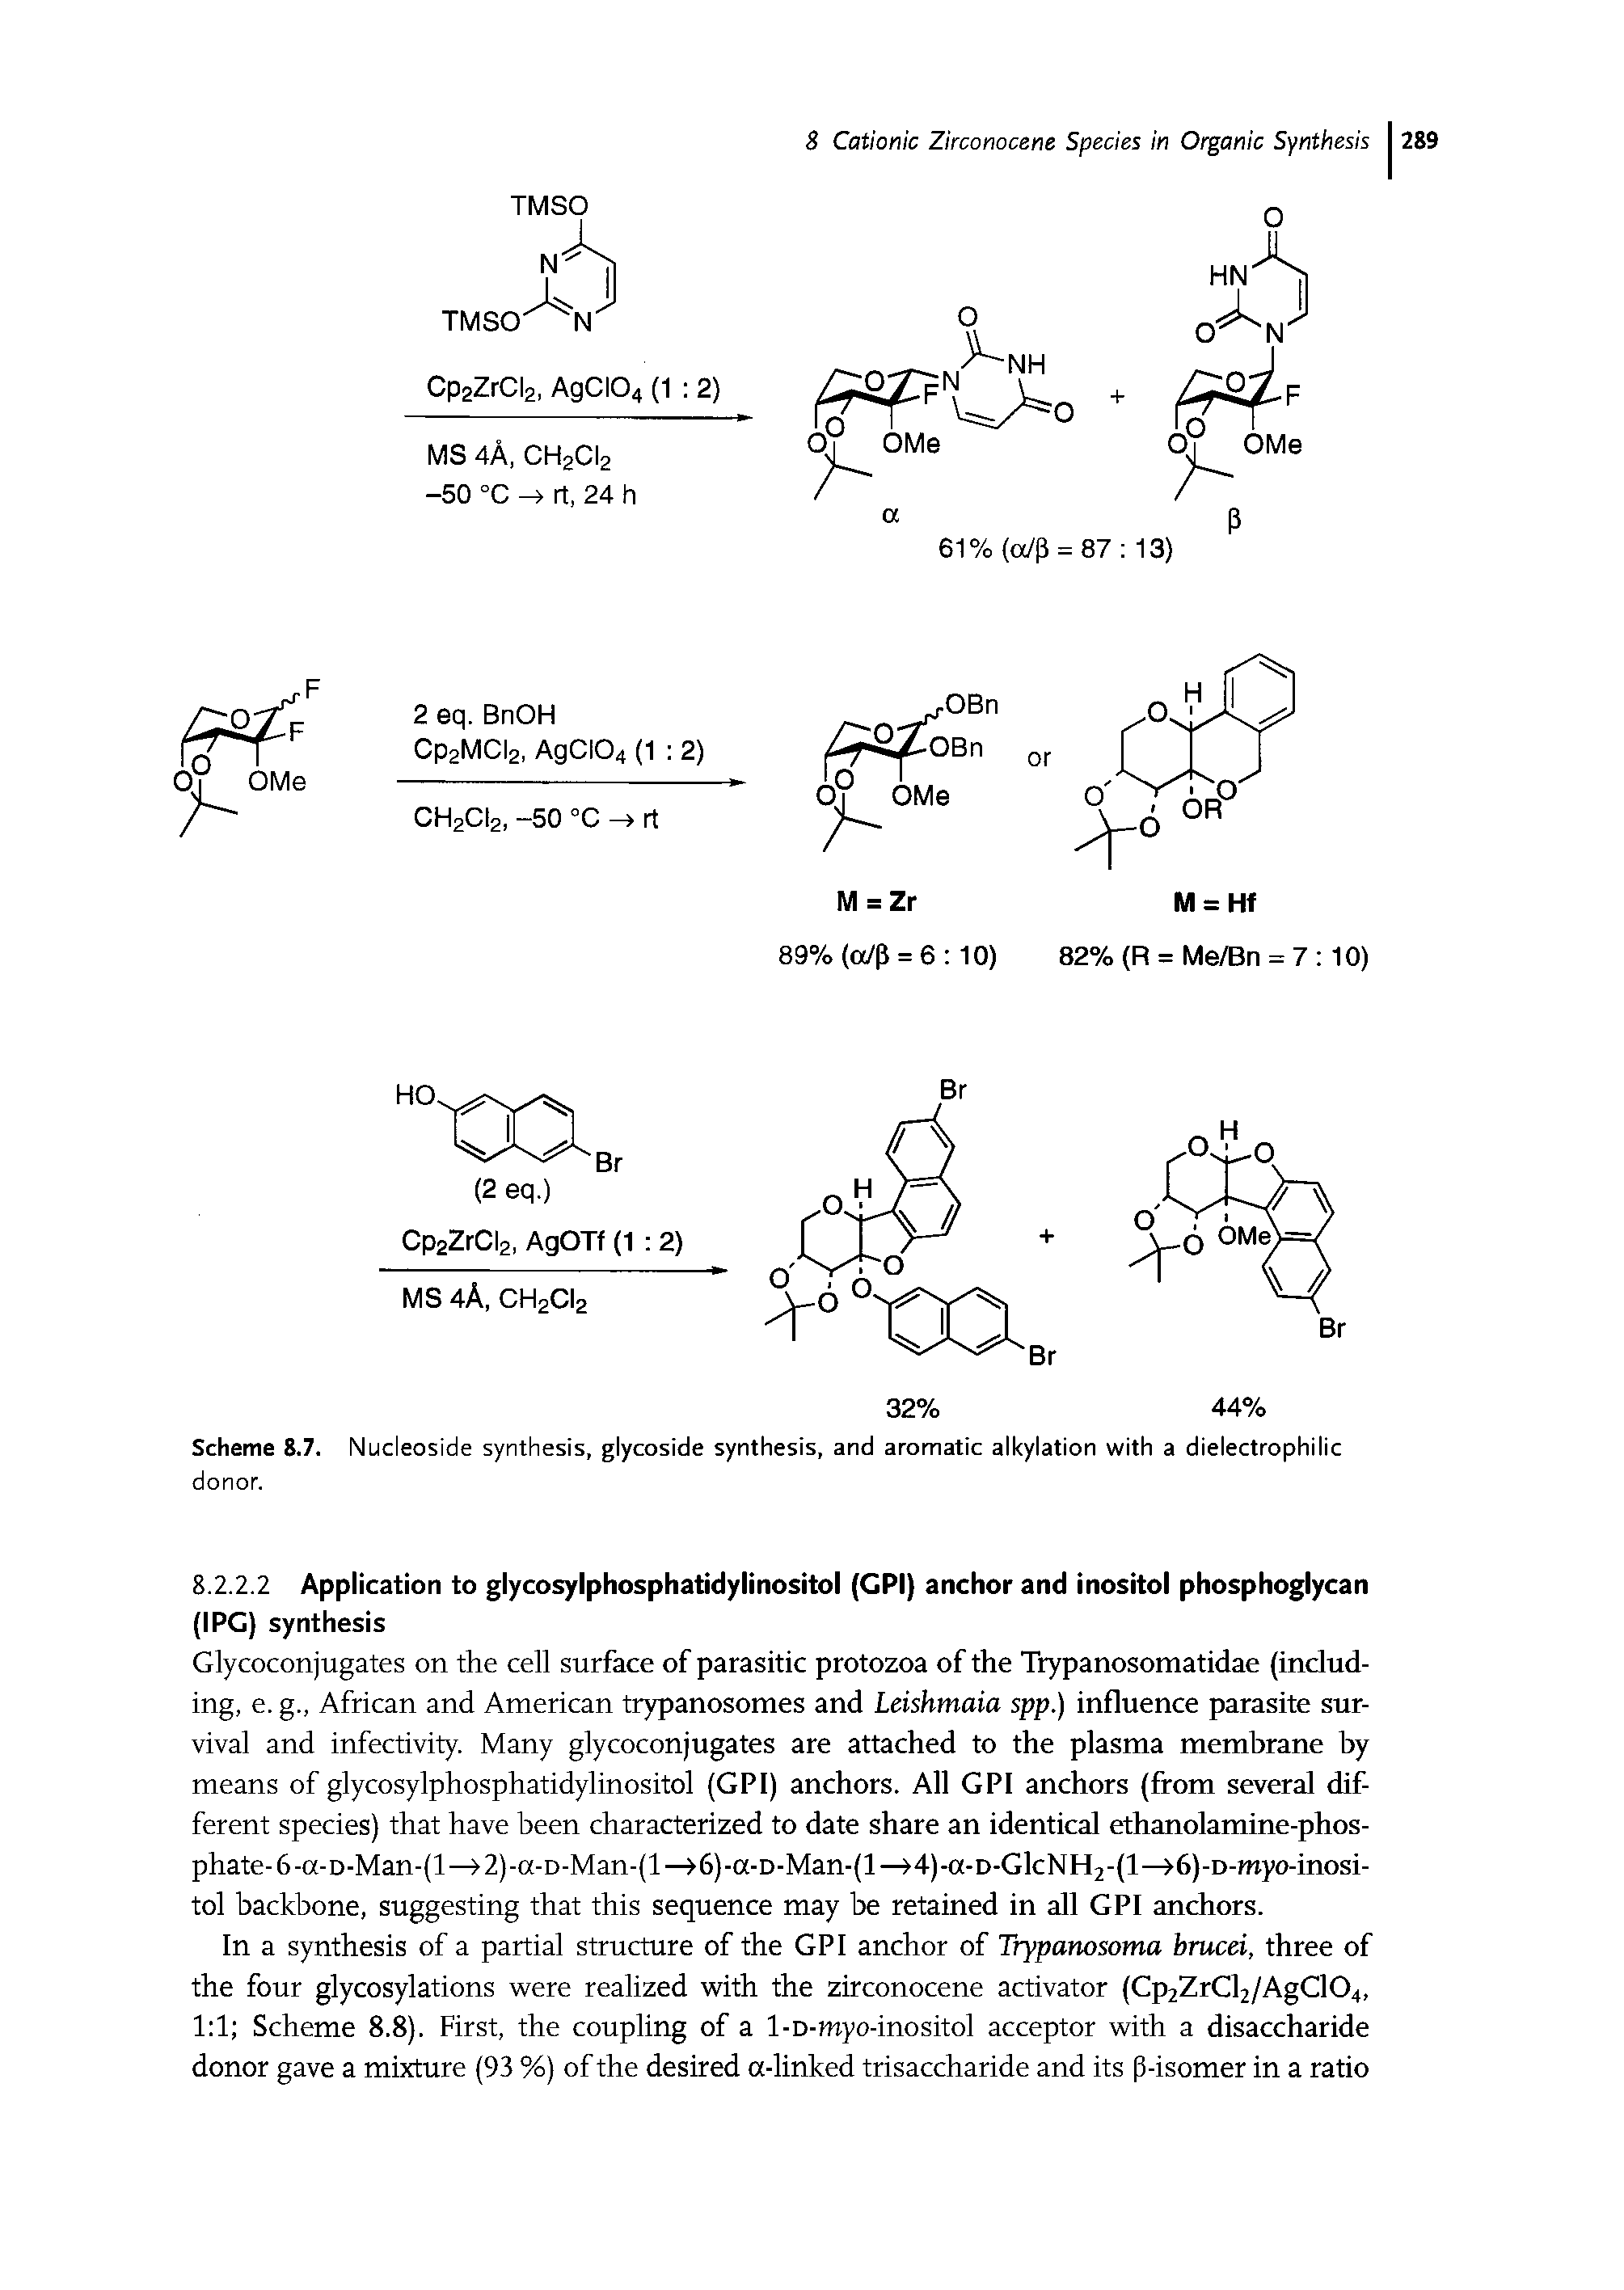 Scheme 8.7. Nucleoside synthesis, glycoside synthesis, and aromatic alkylation with a dielectrophilic donor.